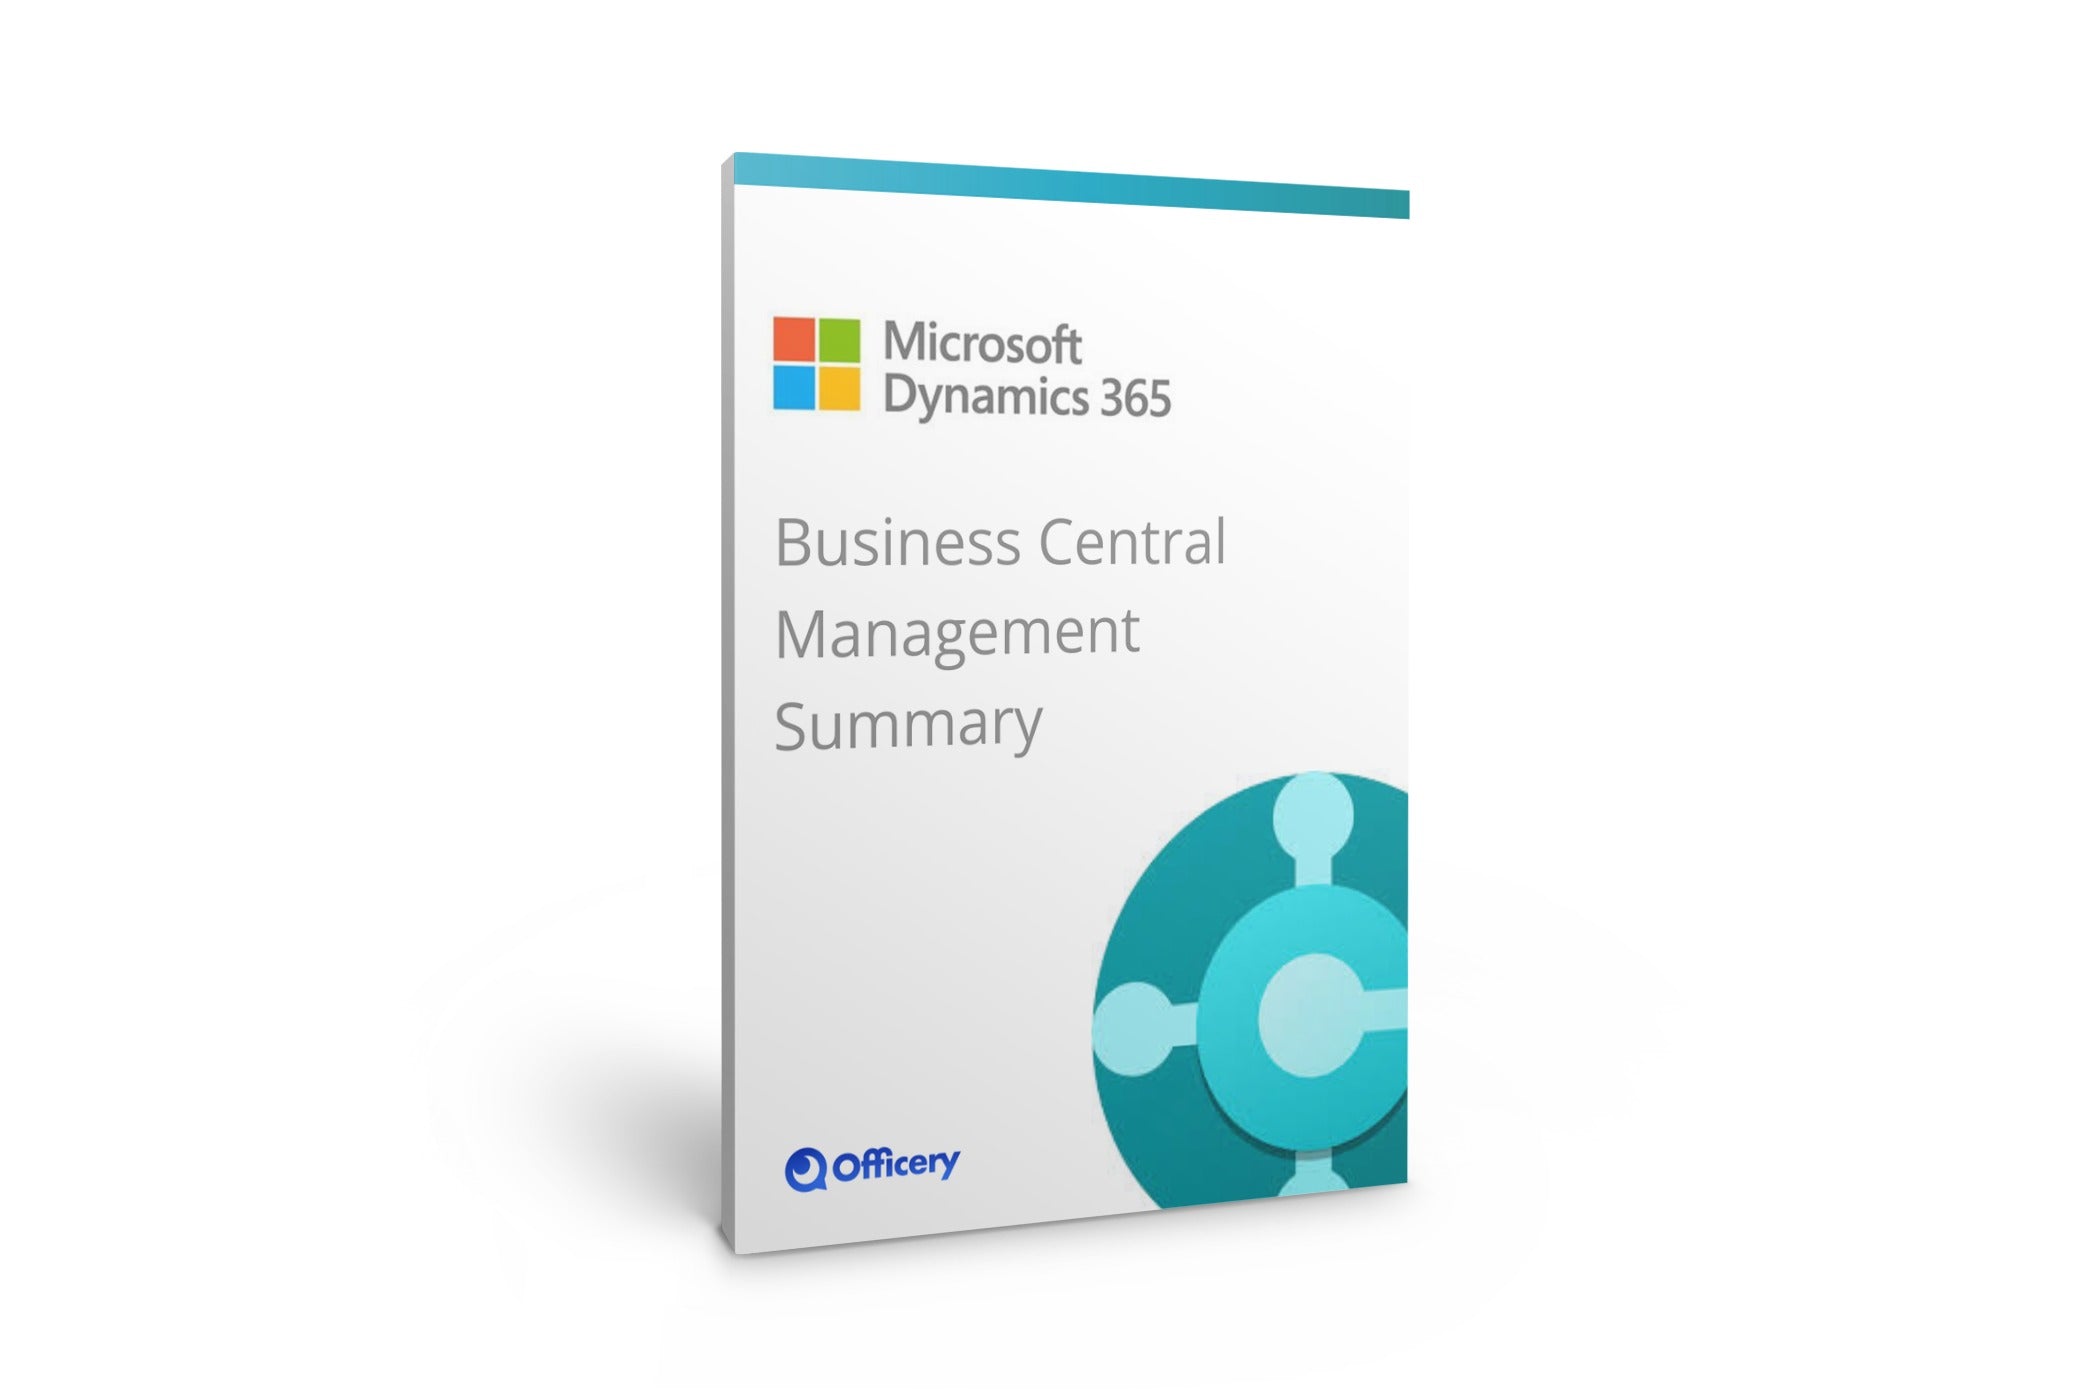 Business Central Management Summary